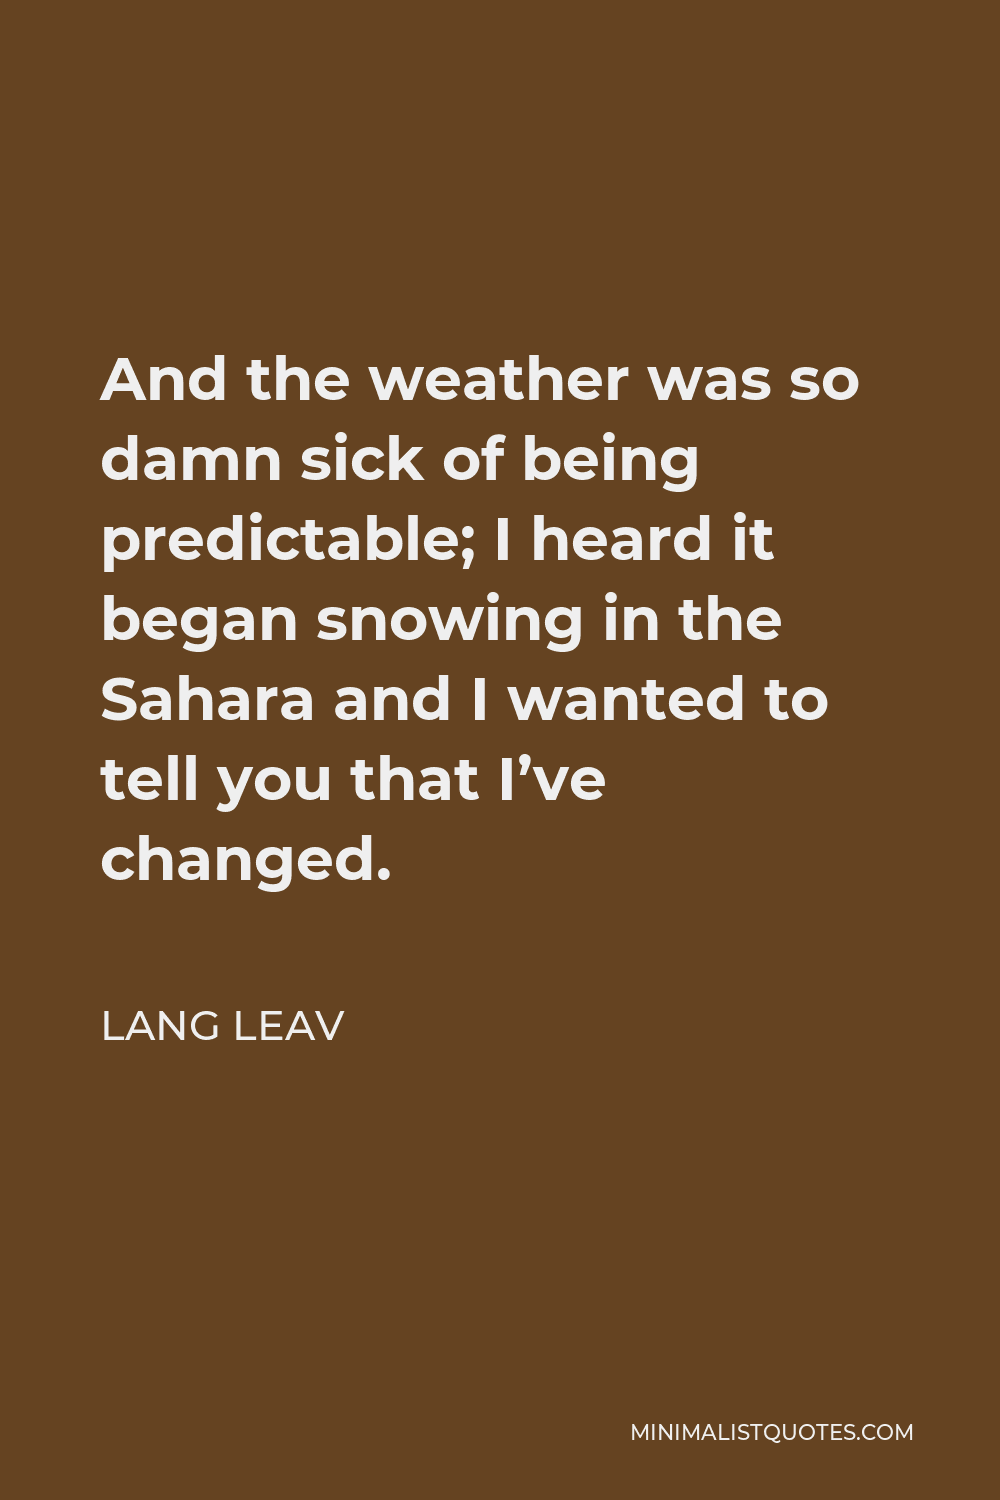 Lang Leav Quote - And the weather was so damn sick of being predictable; I heard it began snowing in the Sahara and I wanted to tell you that I’ve changed.